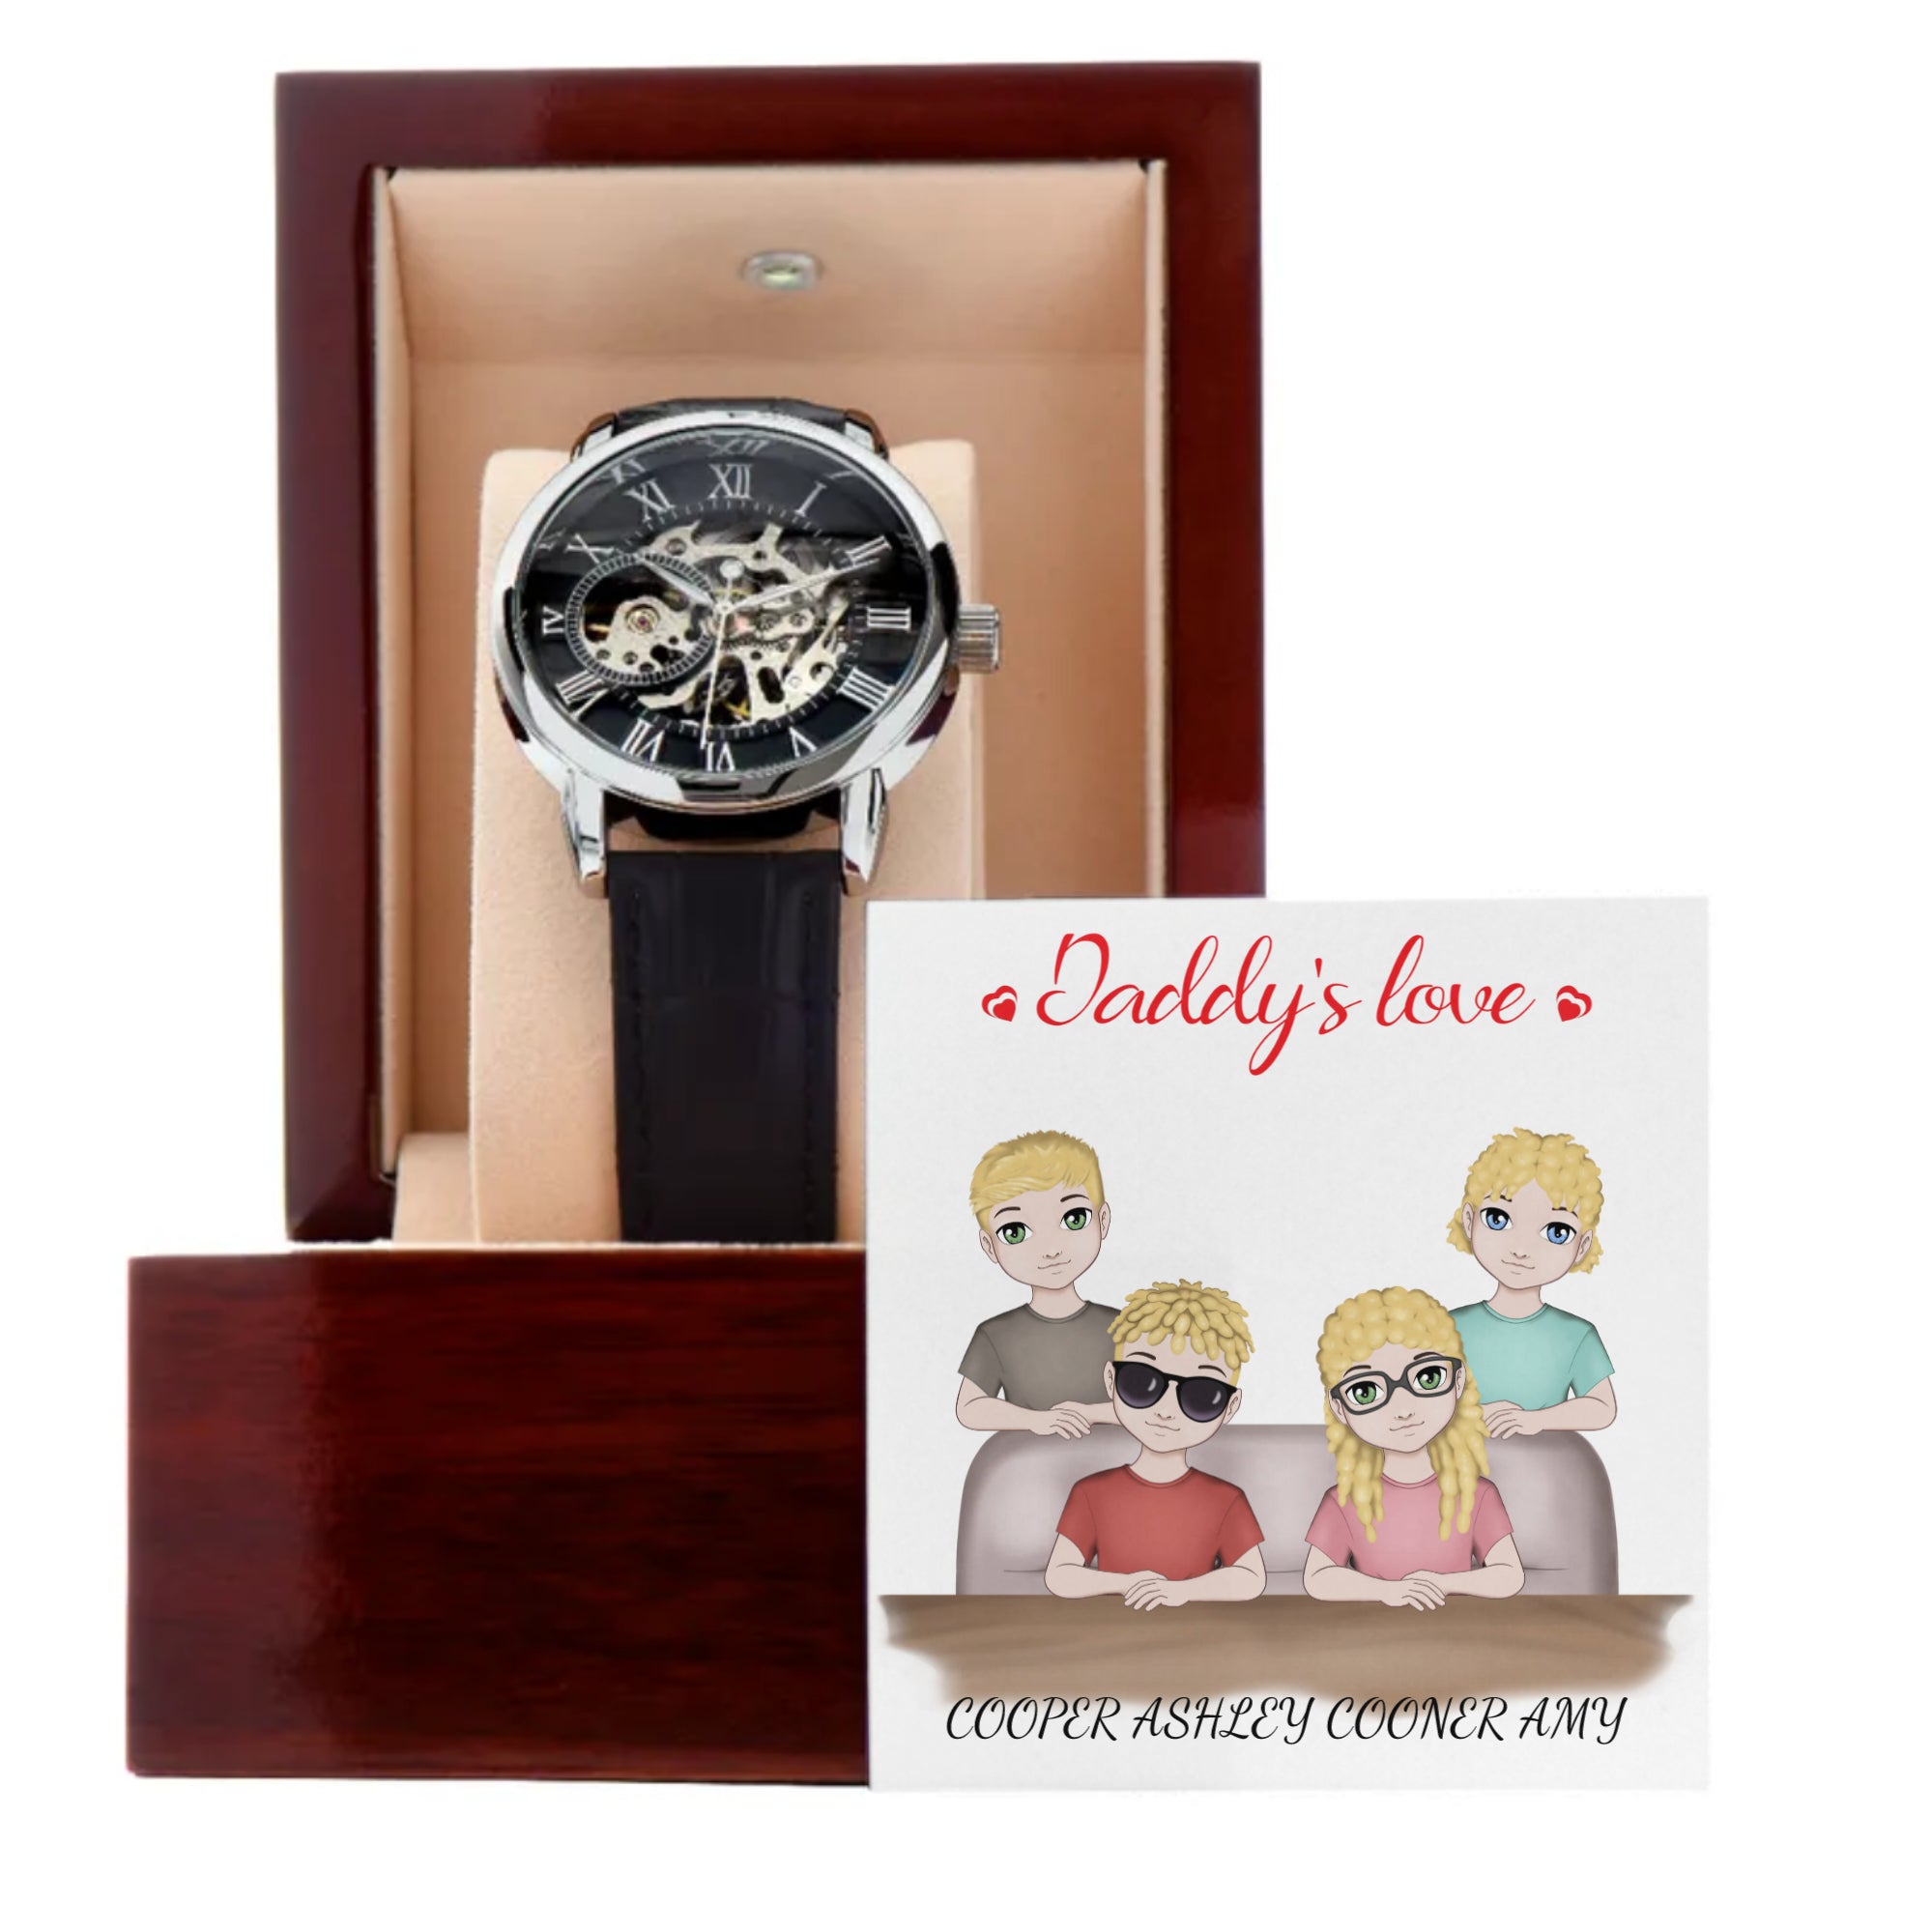 PERSONALIZED MEN'S OPENWORK WATCH DADDY'S LOVE CARD ADD UP TO FOUR KIDS ON THE CARD